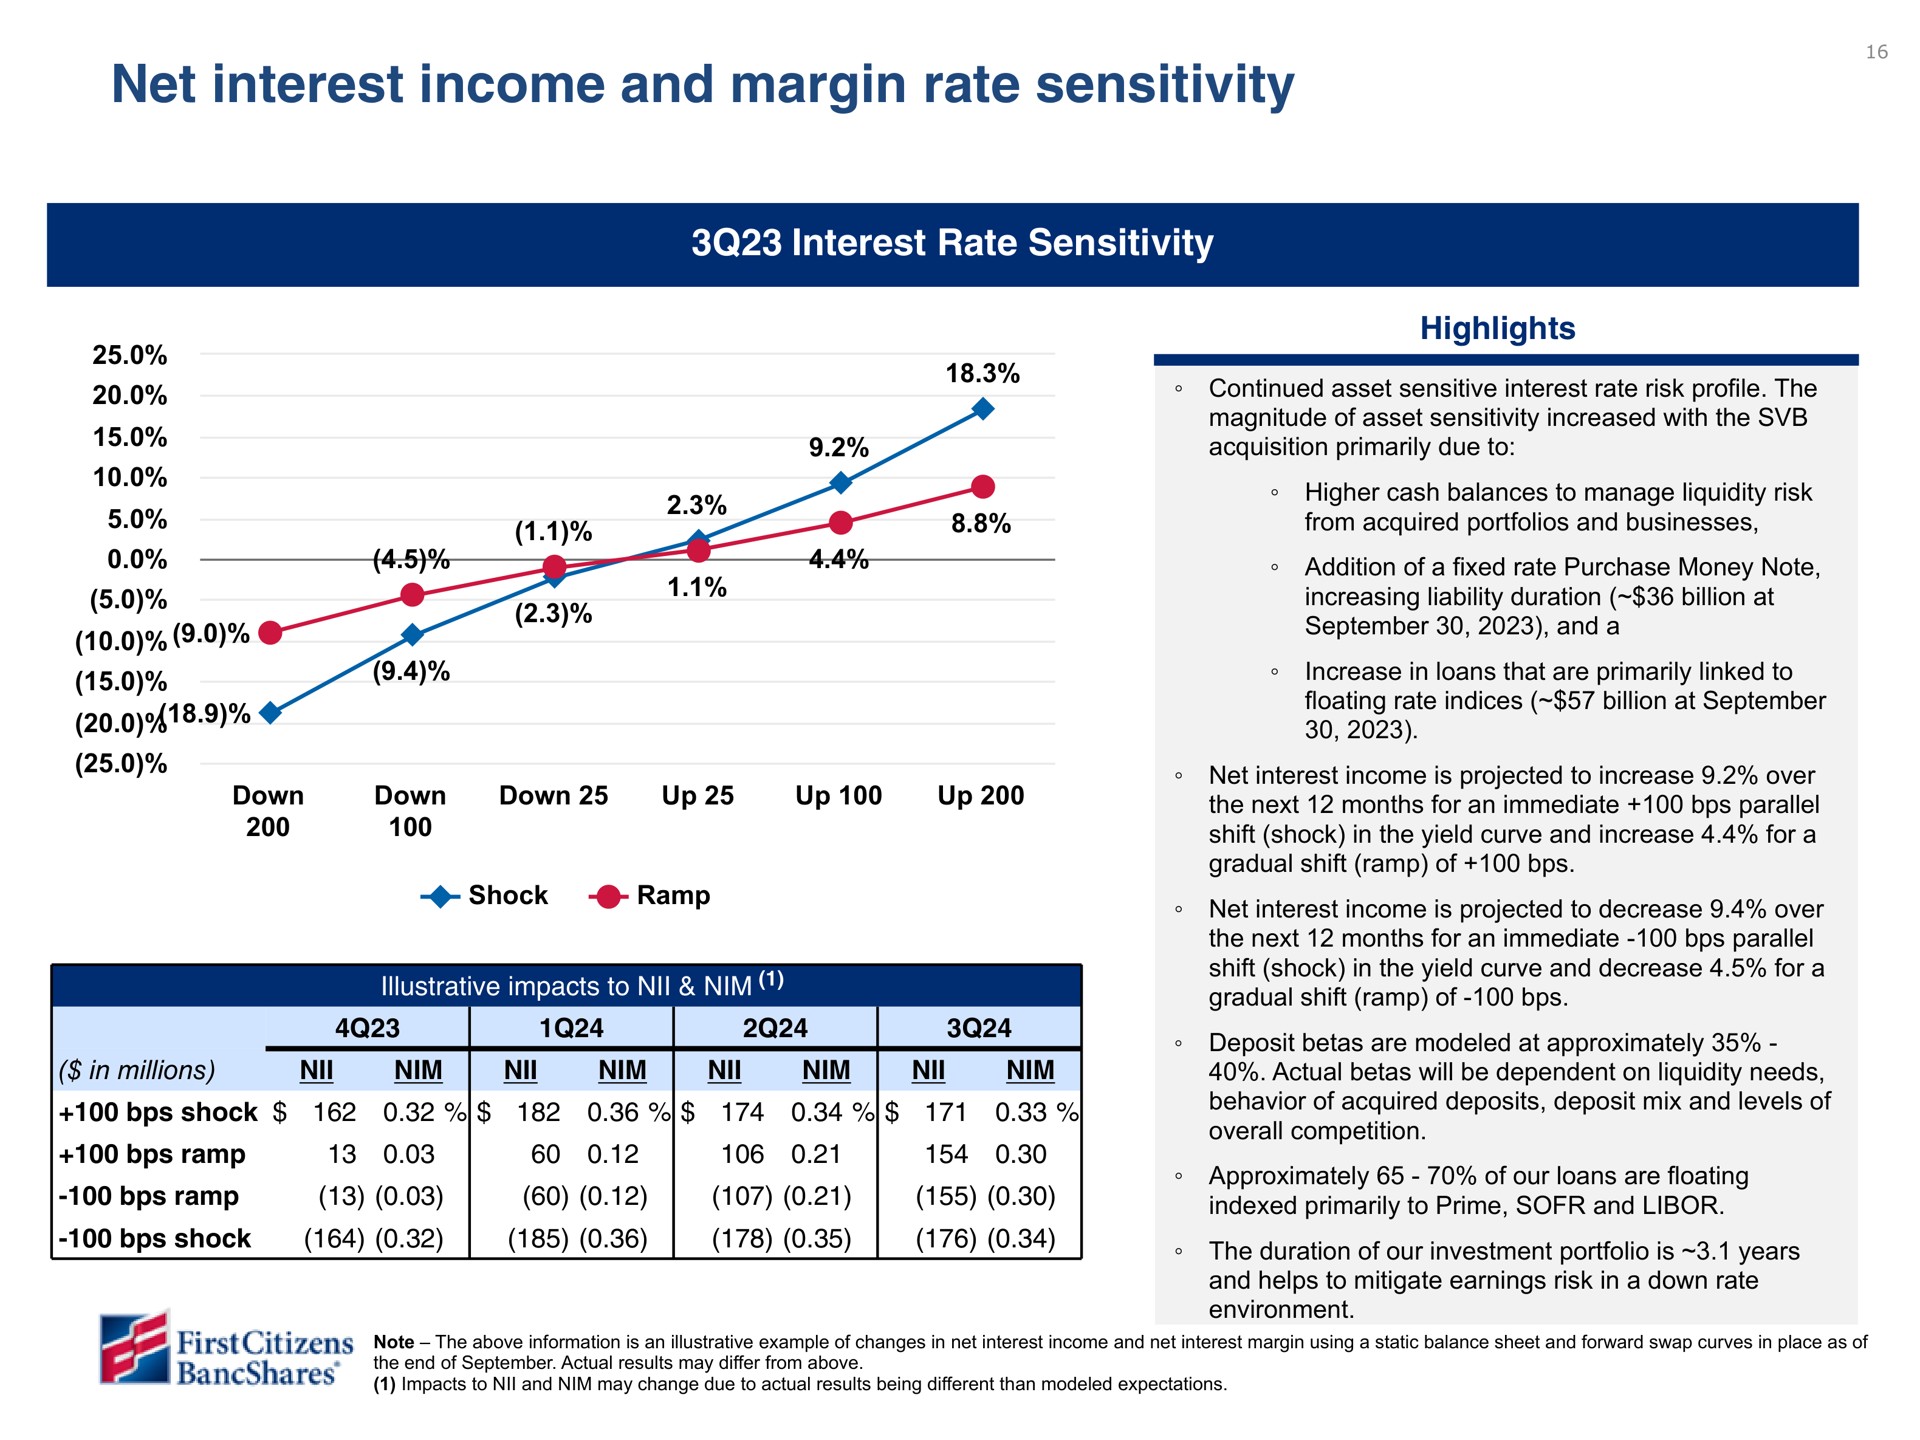 net interest income and margin rate sensitivity interest rate sensitivity up | First Citizens BancShares